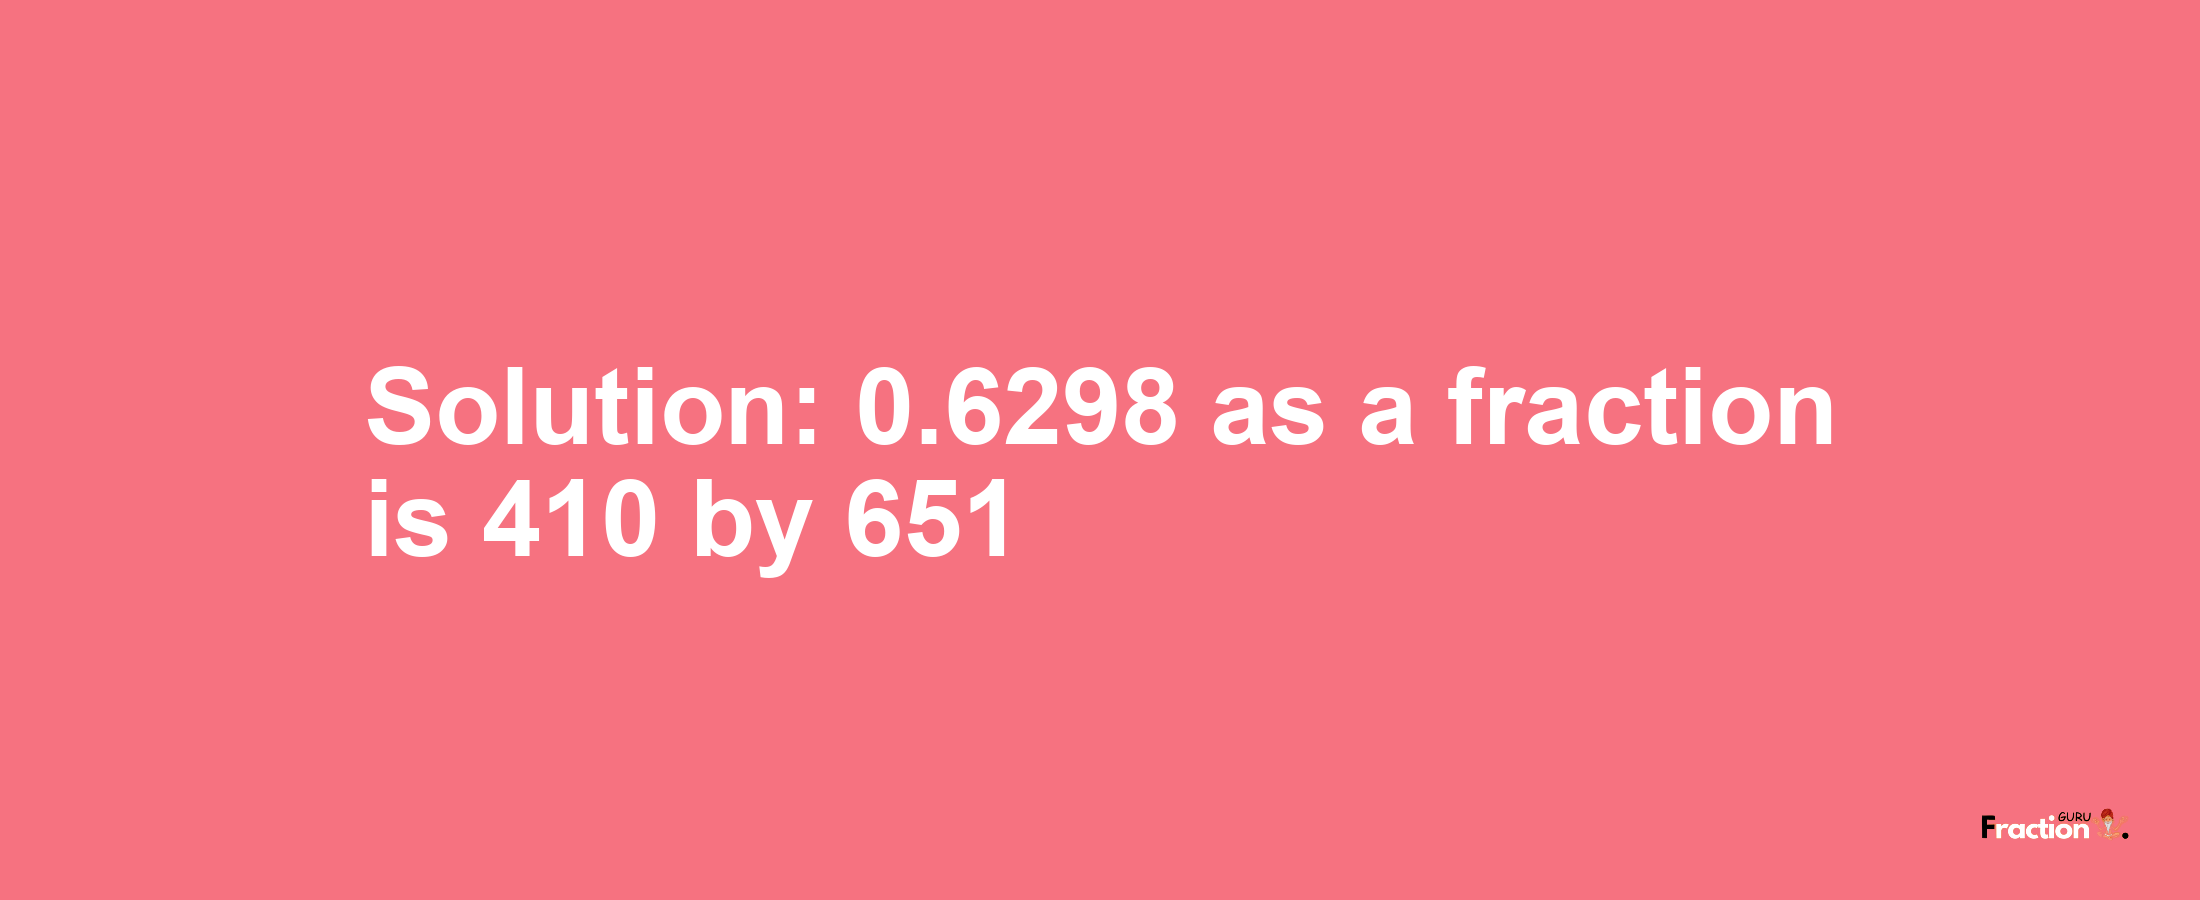 Solution:0.6298 as a fraction is 410/651